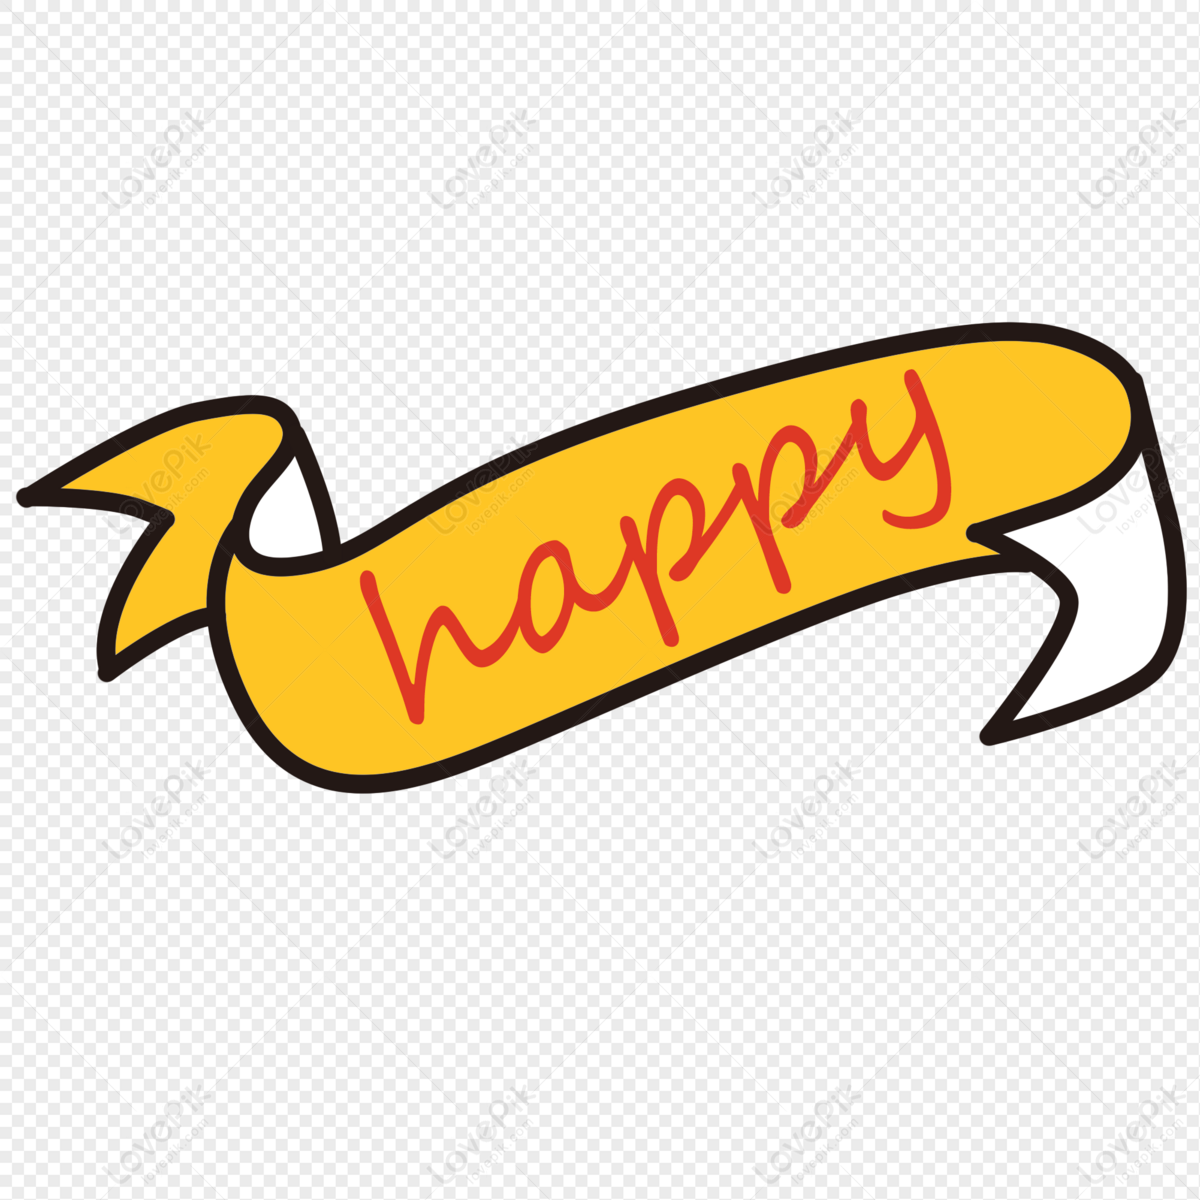 Yellow Streamers PNG, Vector, PSD, and Clipart With Transparent Background  for Free Download